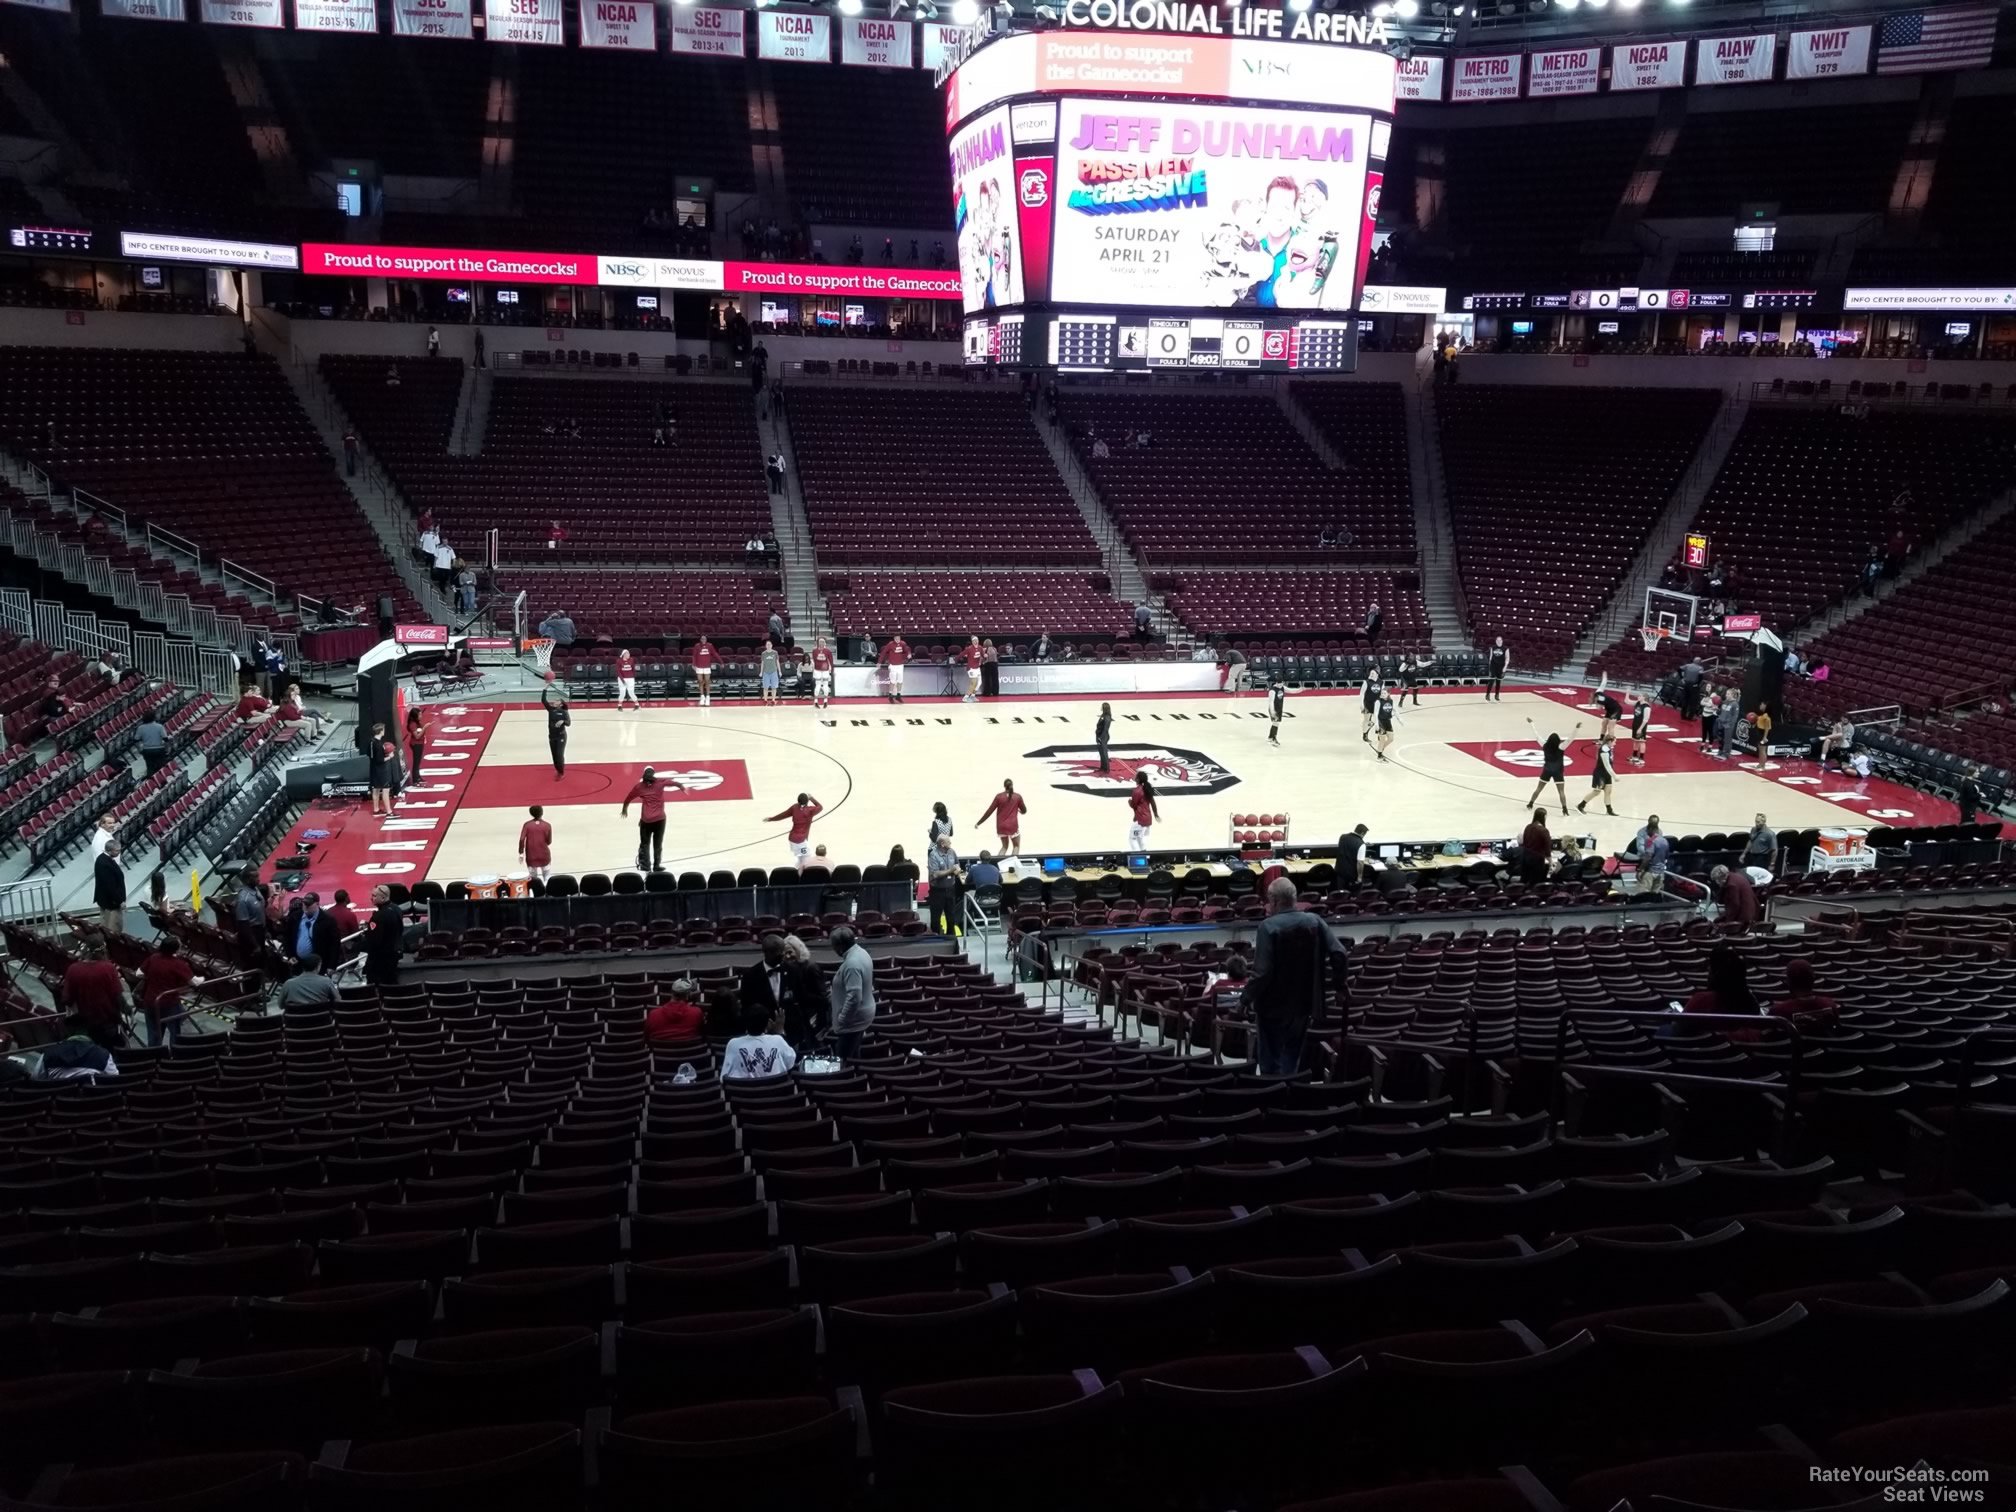 section 106, row 25 seat view  for basketball - colonial life arena